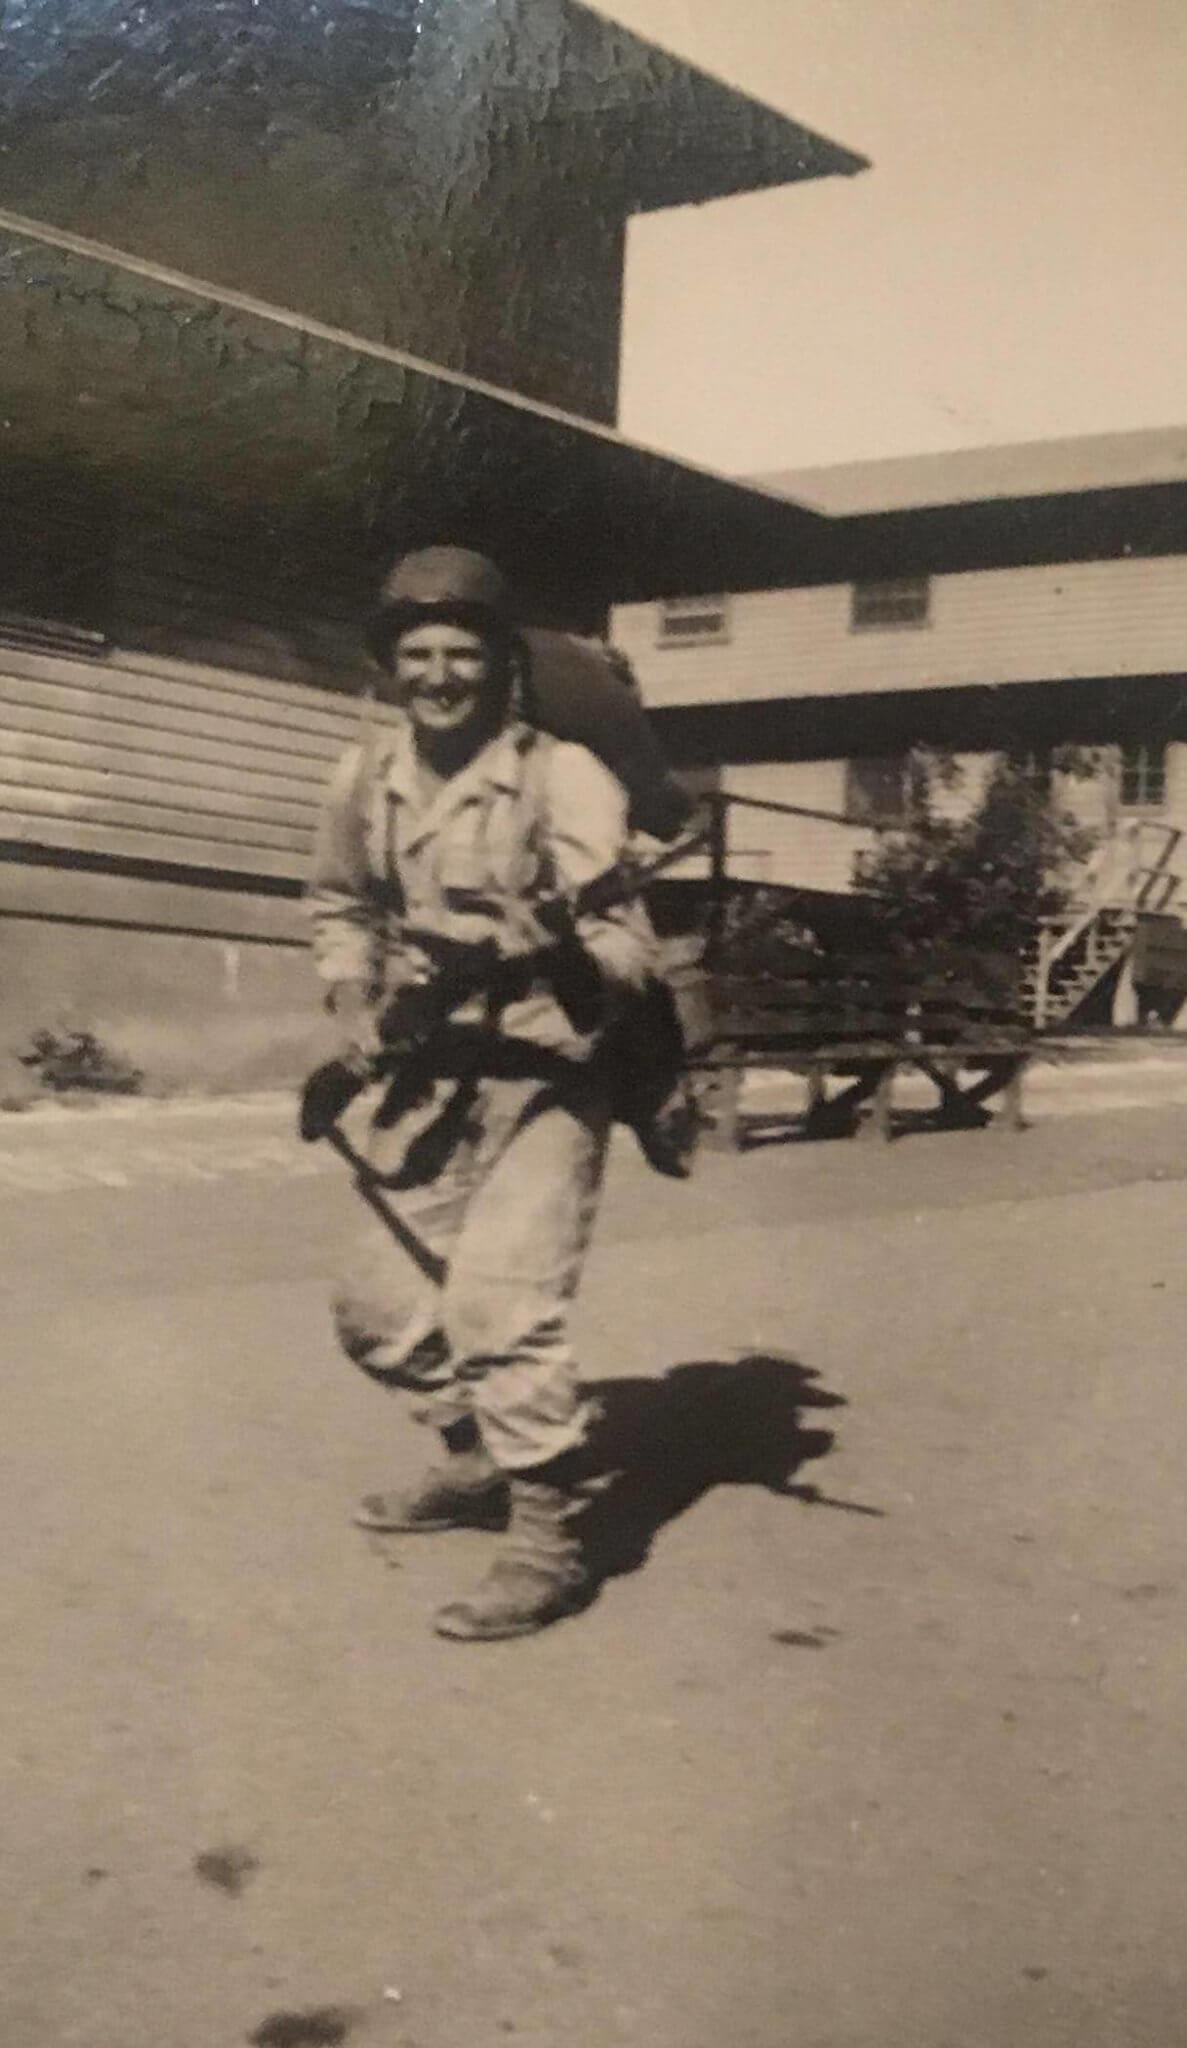 OldOld Man at boot Camp. Ft. Hood, I believe. WW II